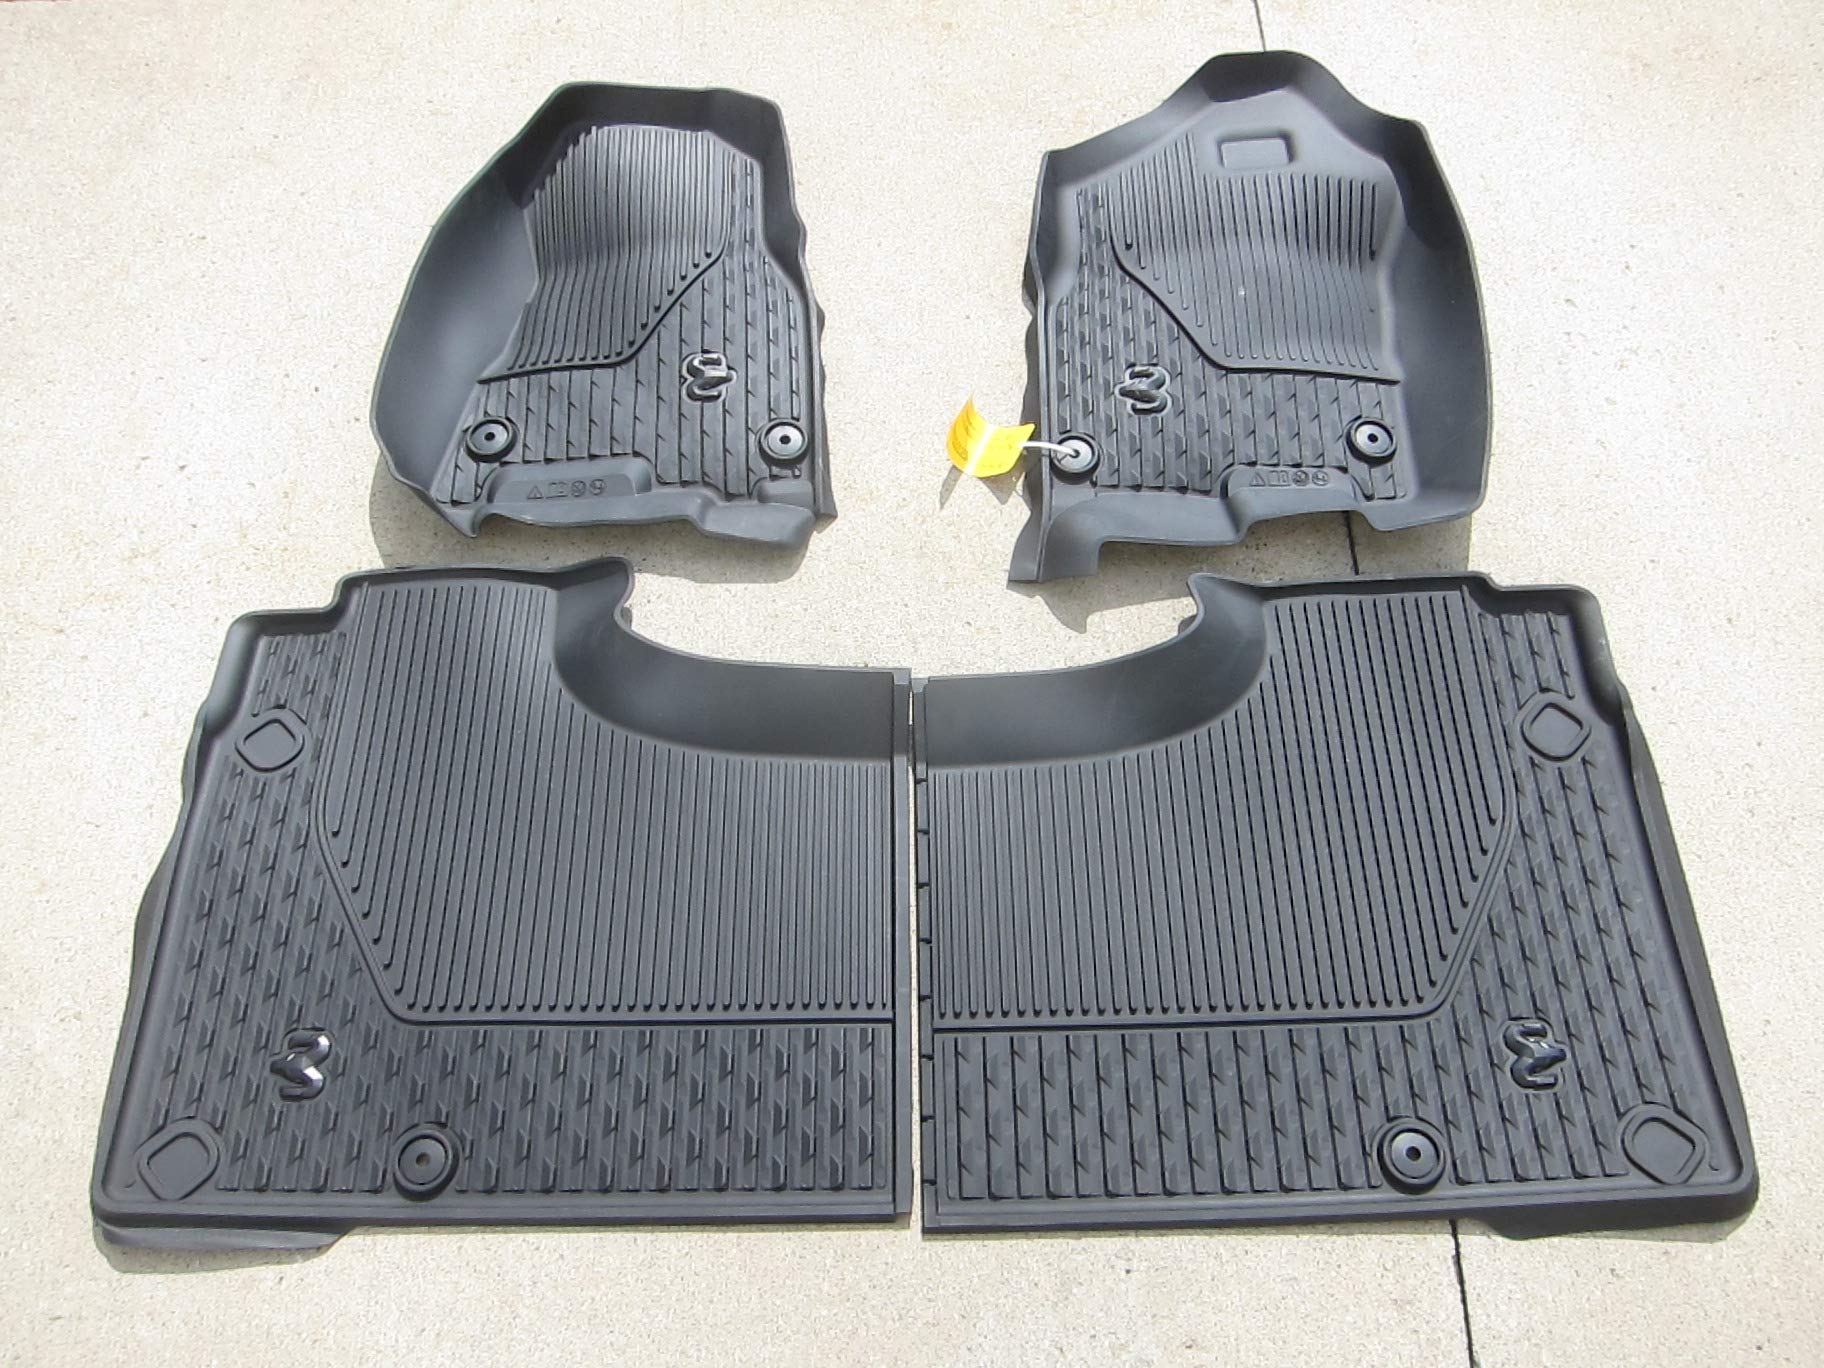 Ram 1500 DT (New Body Style) Crew Cab All Weather Mats New Mopar OEM